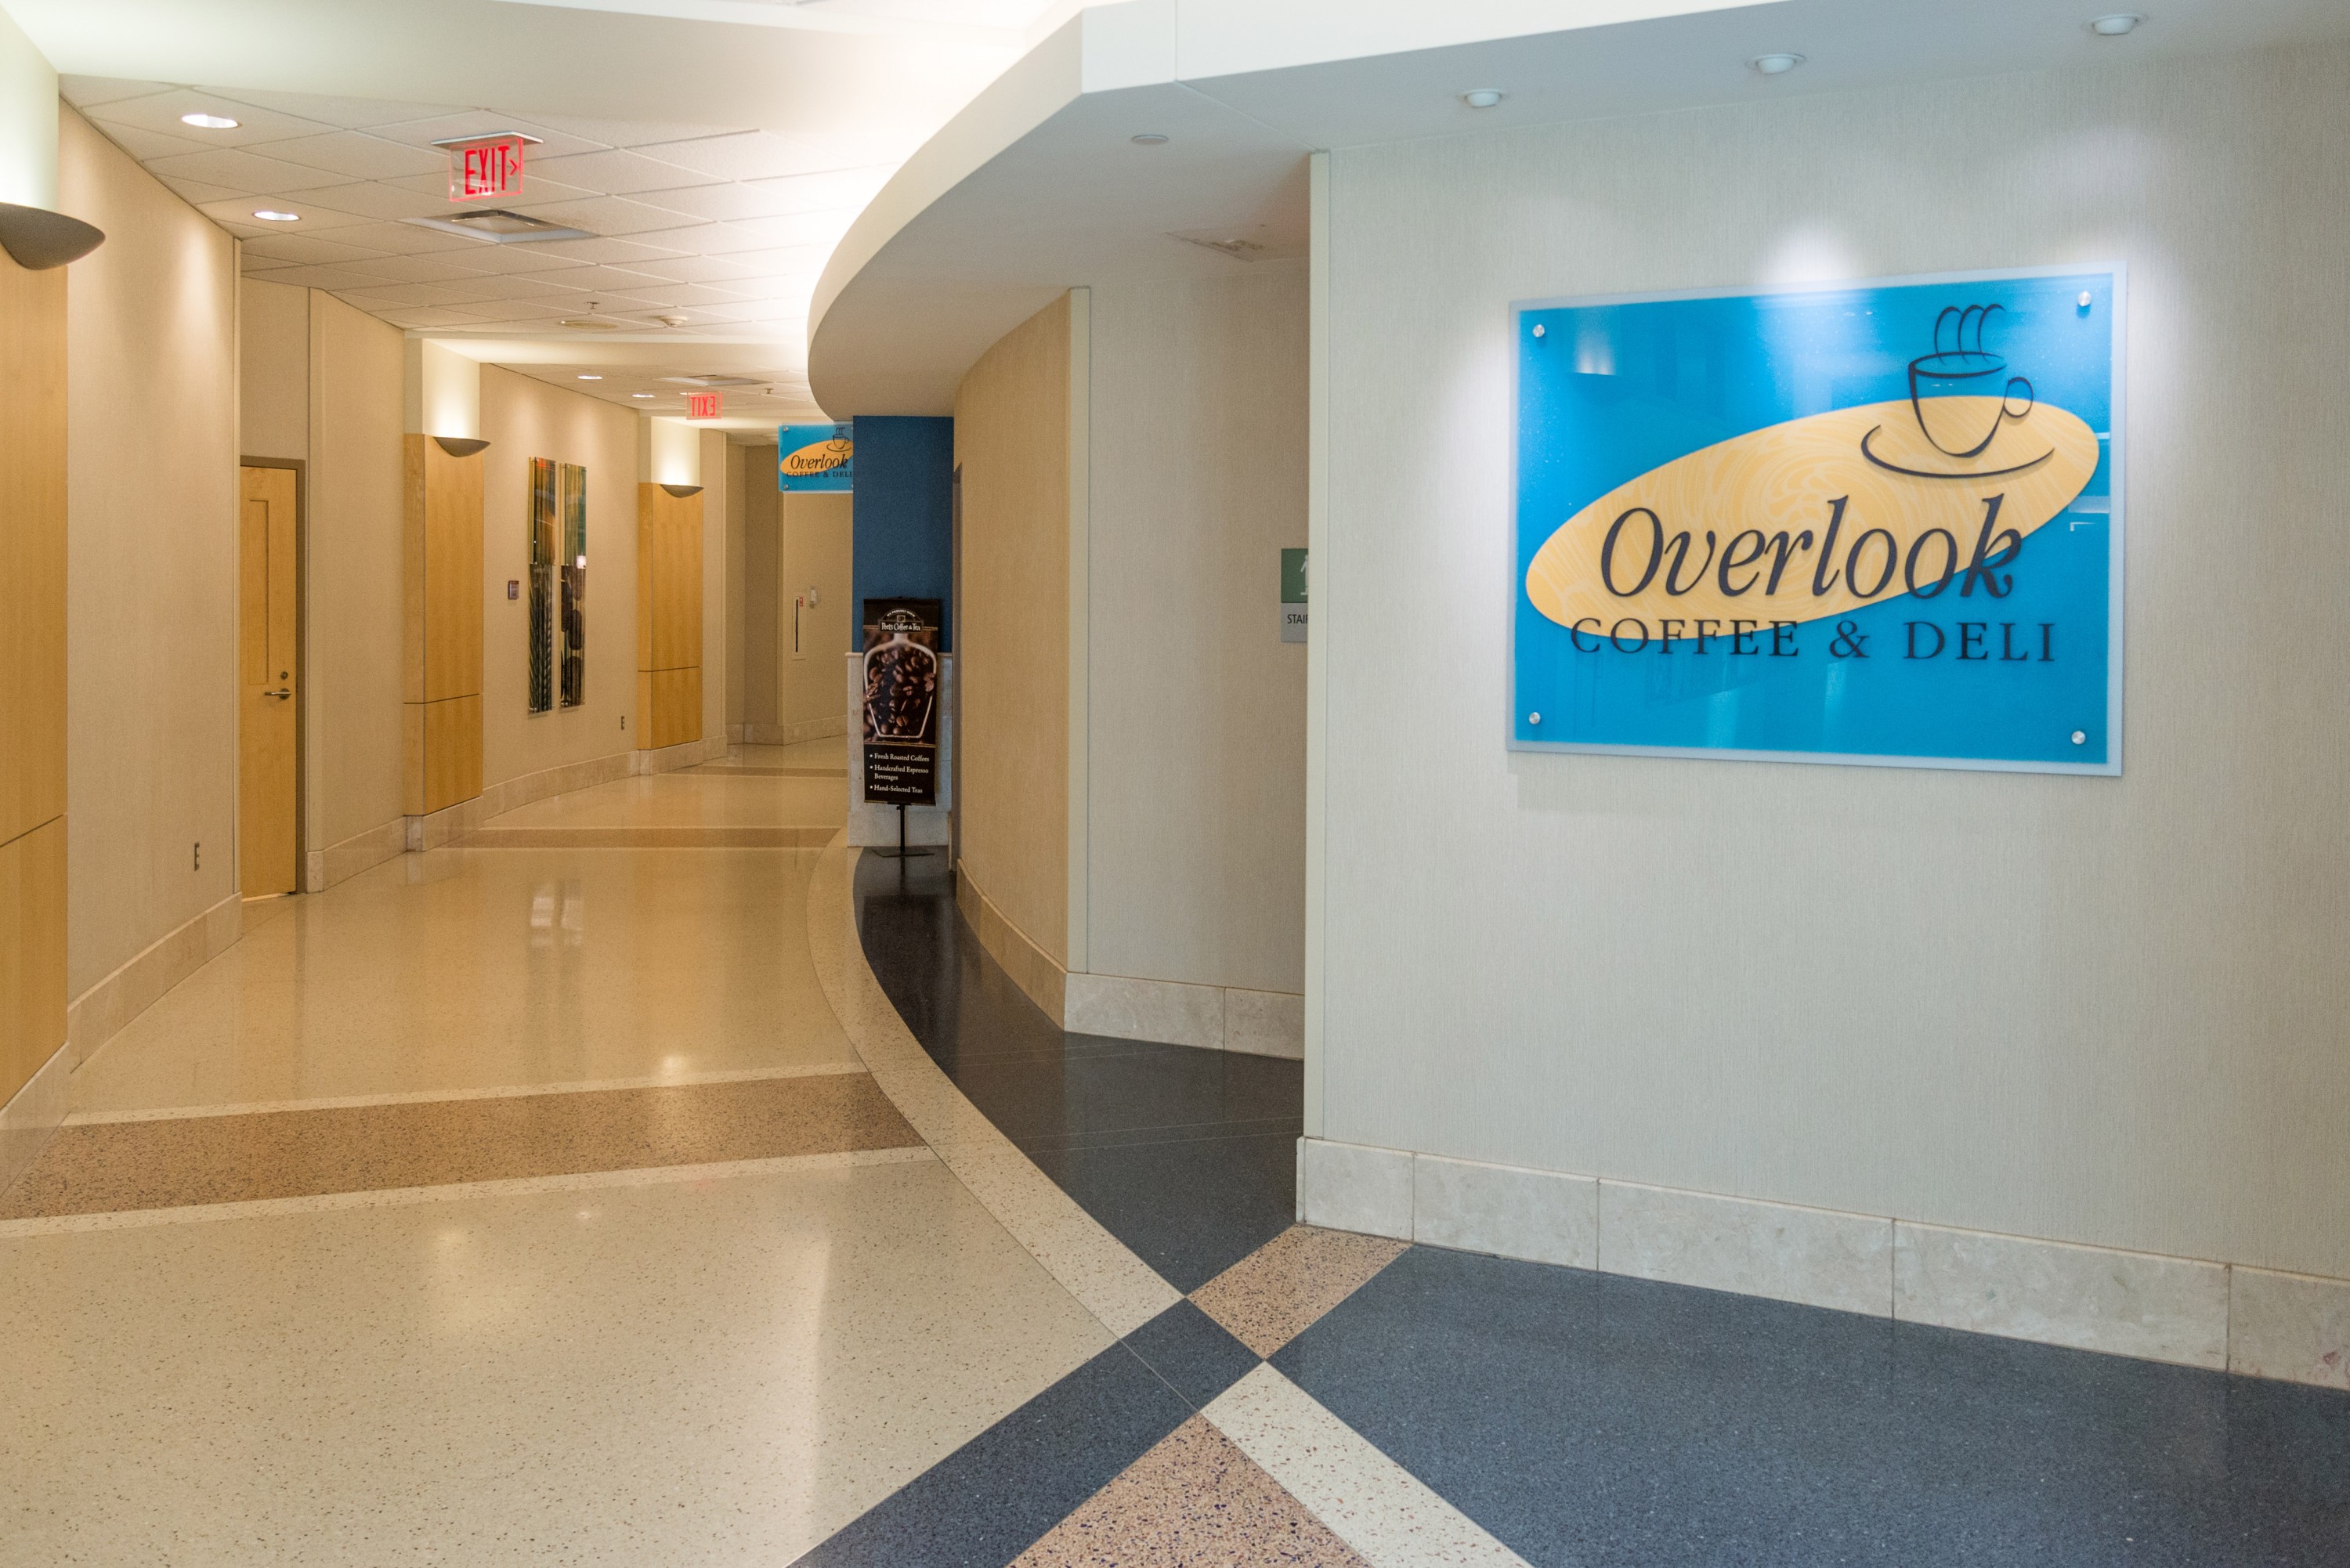 Overlook Coffee and Deli entrance at regions hospital for gillette children's patients